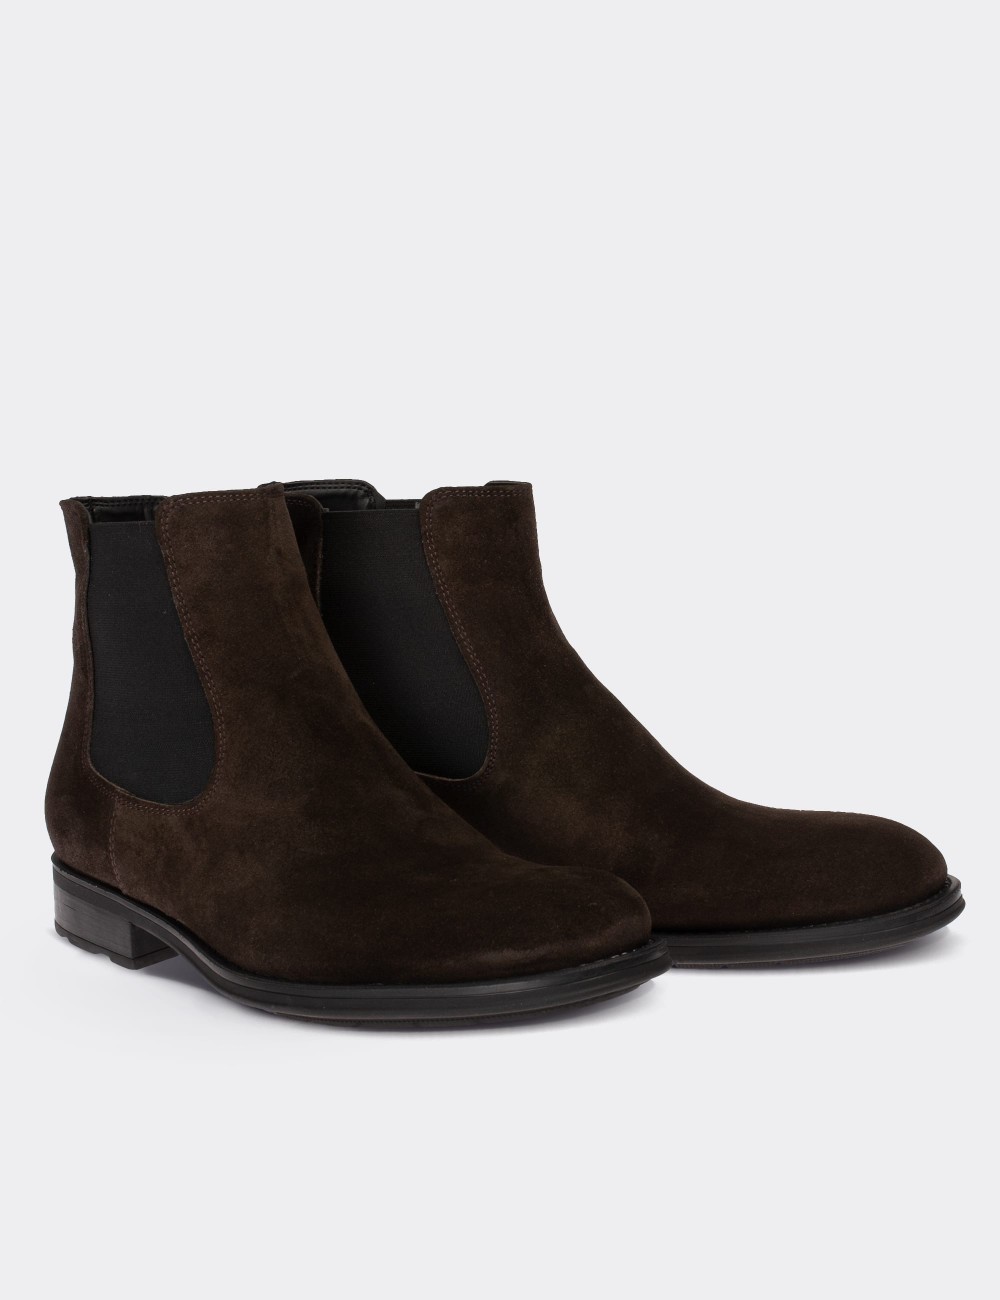 Brown Suede Leather Chelsea Boots - 01620MKHVC25